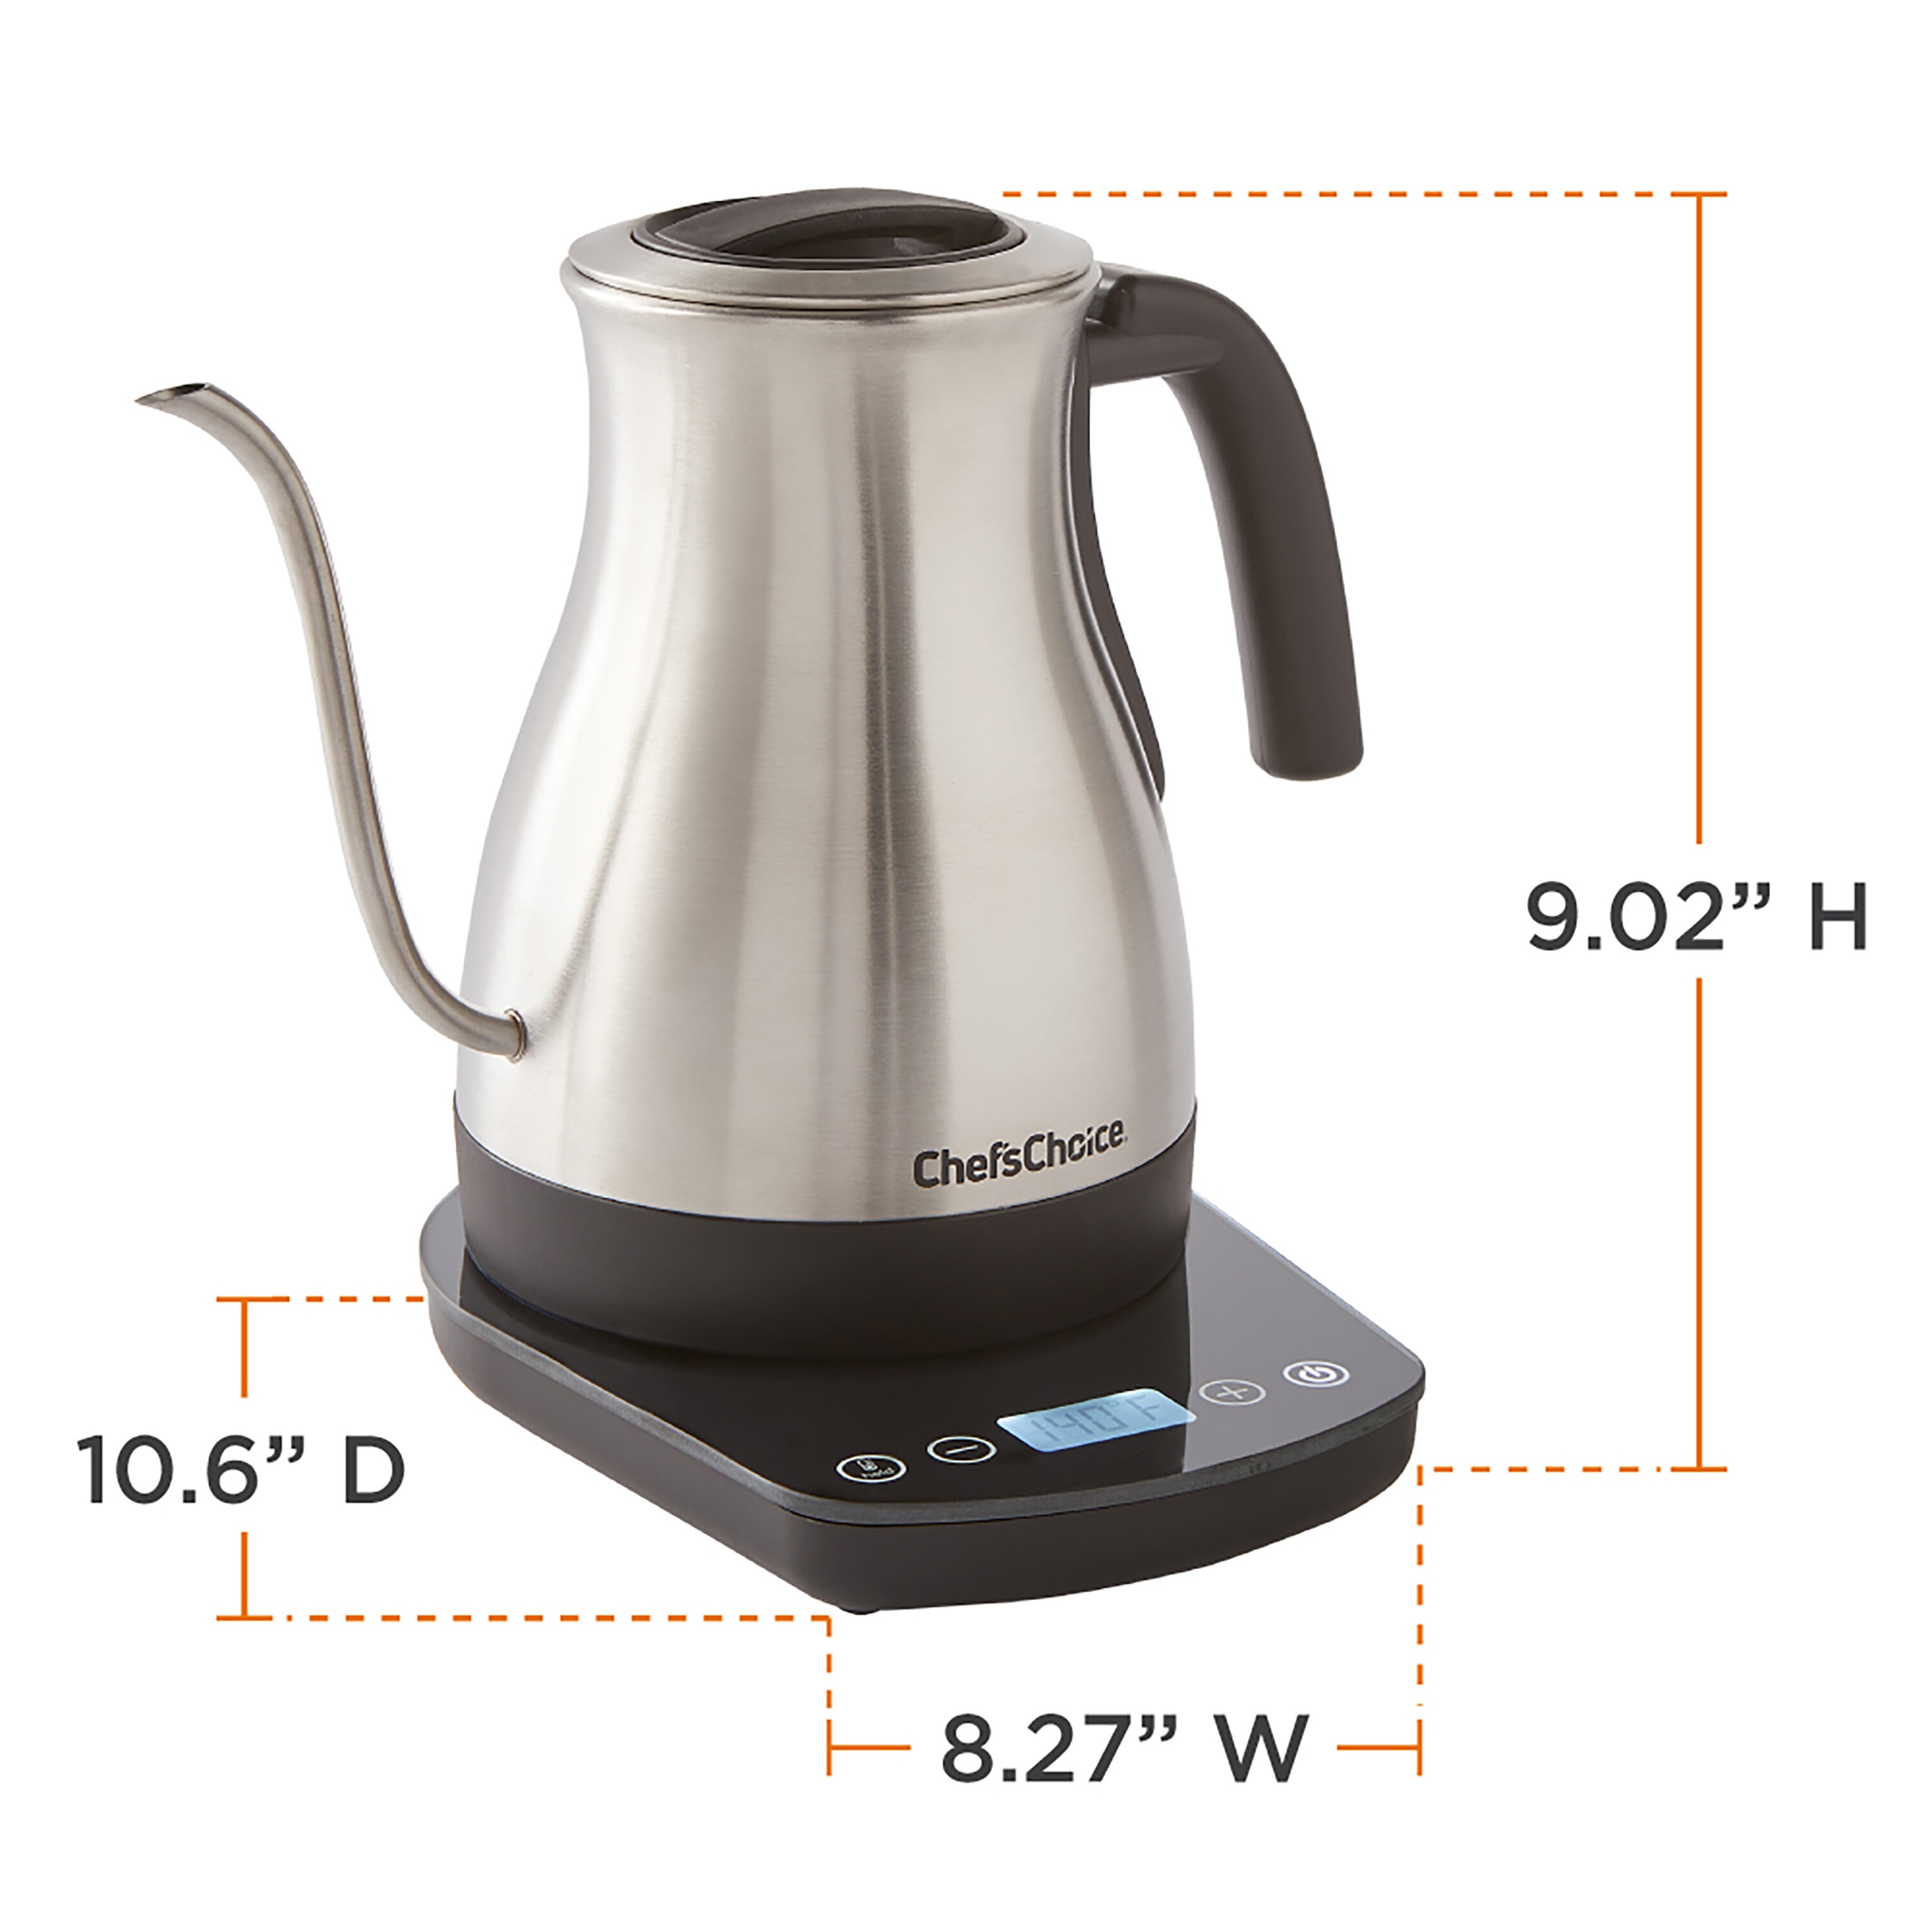  Ninja KT200BL Precision Temperature Electric Kettle, 1500  watts, BPA Free, Stainless, 7-Cup Capacity, Hold Temp Setting, Blue  Stainless: Home & Kitchen